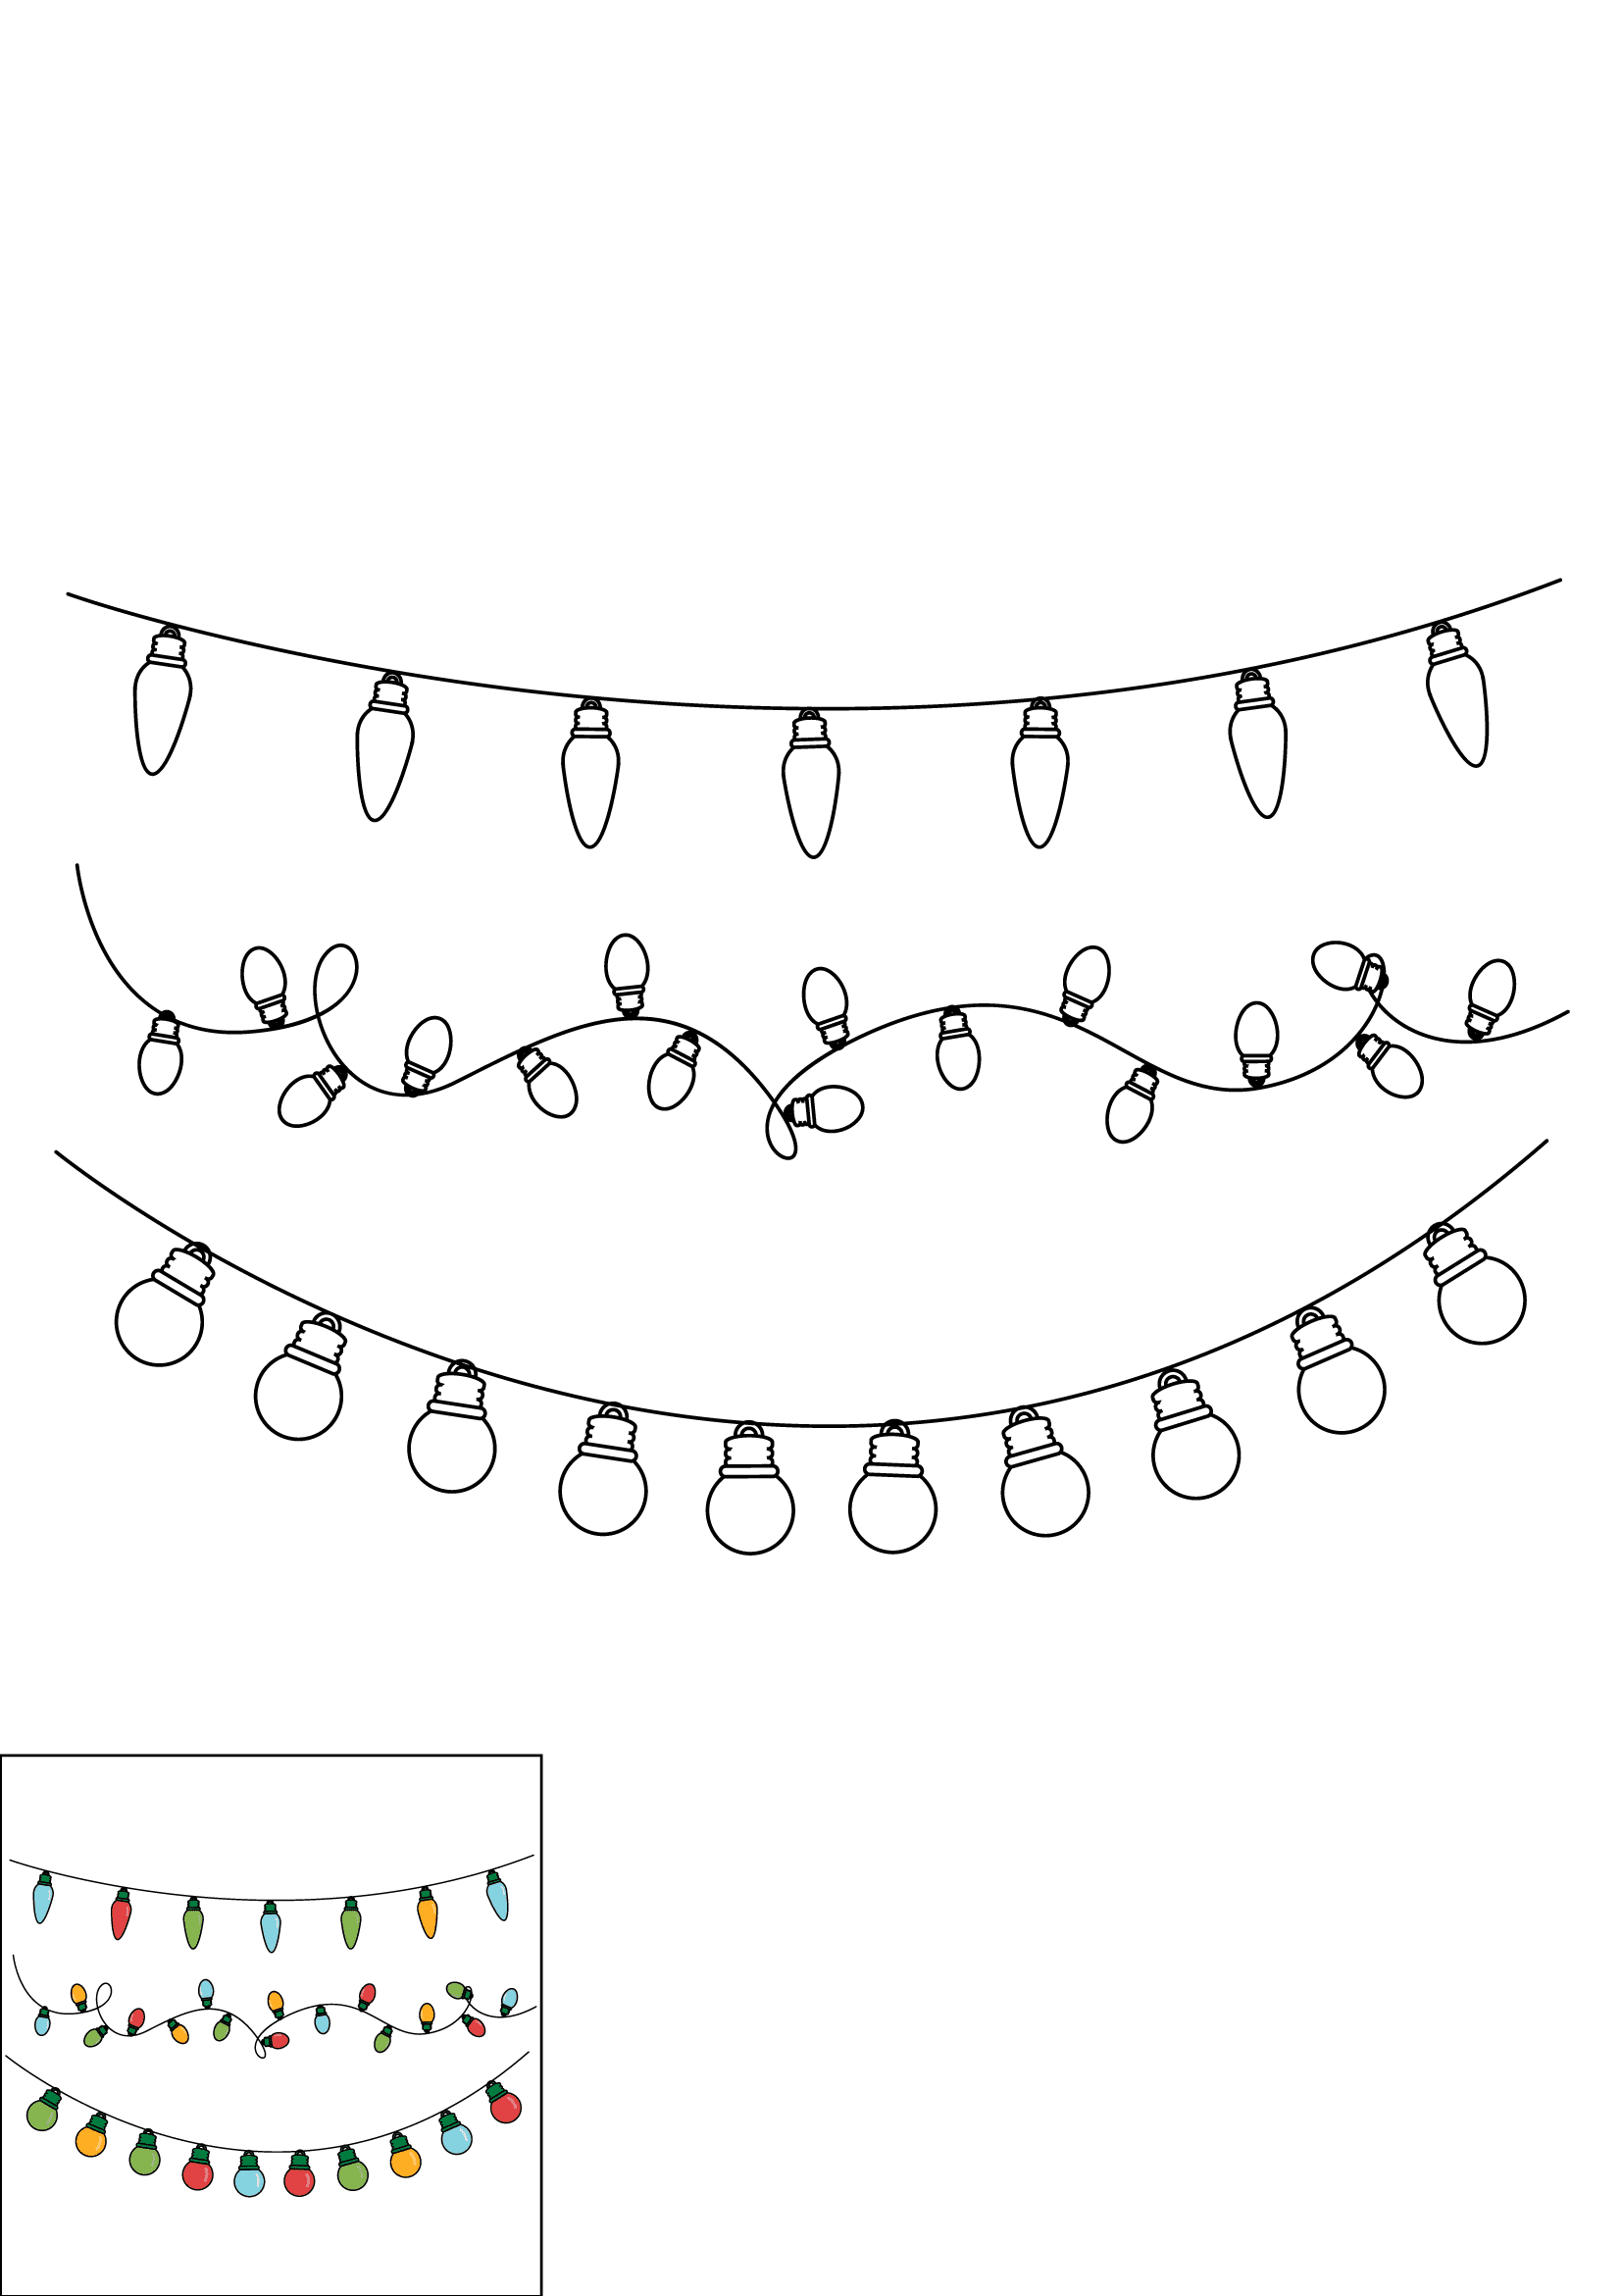 How to Draw Christmas Lights Step by Step Printable Color